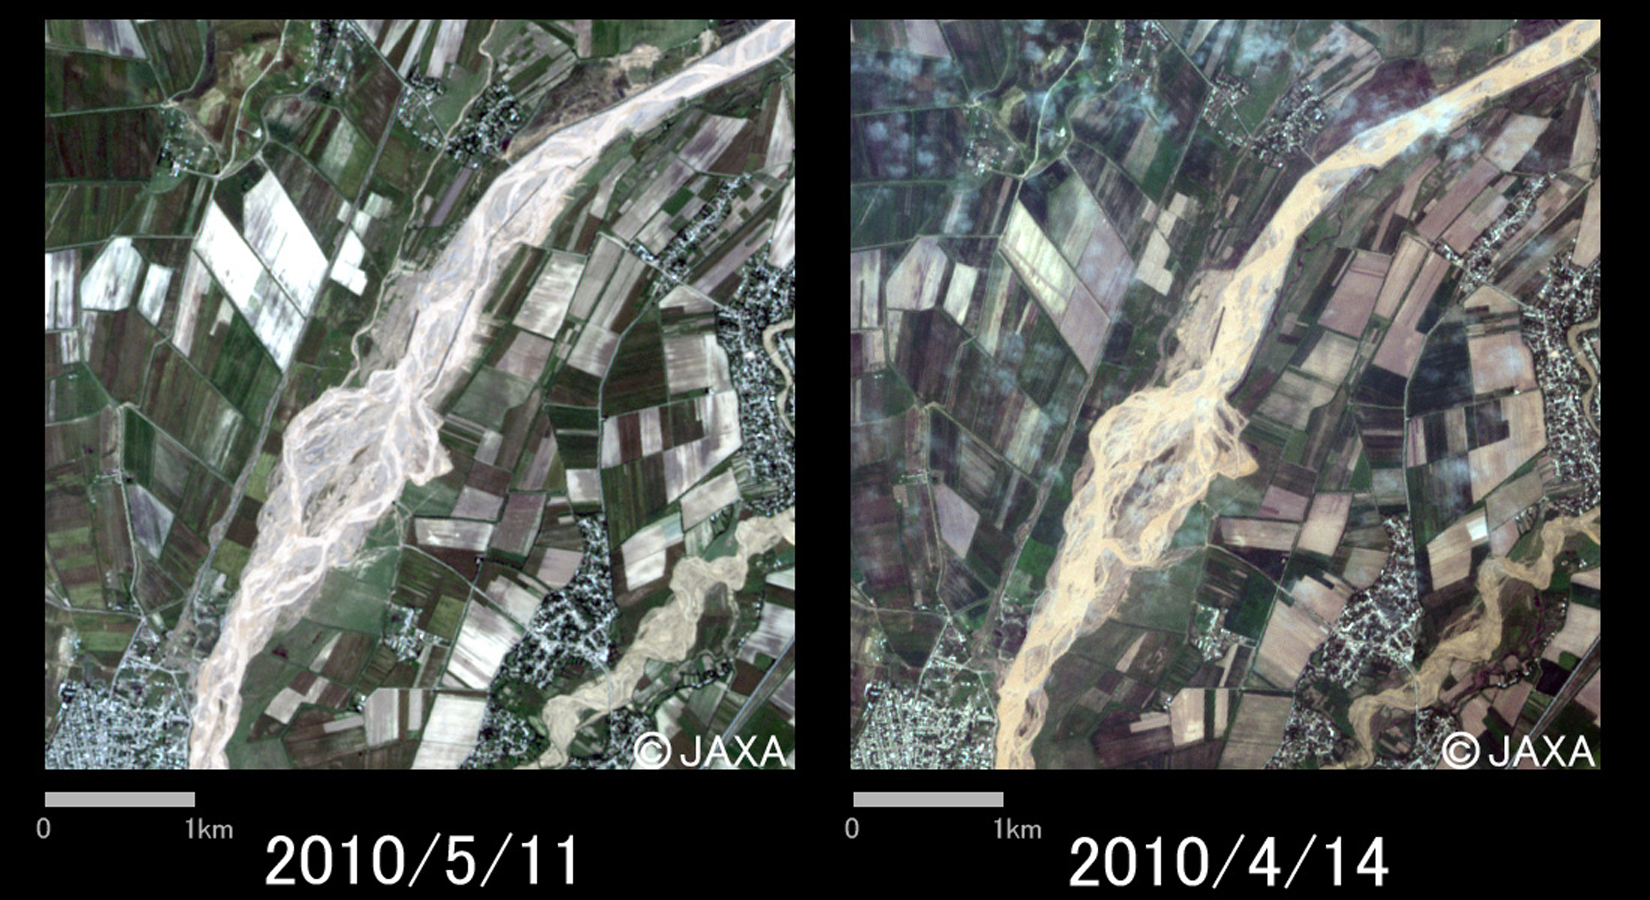 Fig. 2: Enlarged image around Imeni Vose (5km square, left: May 11, 2010; right: April 14, 2010).